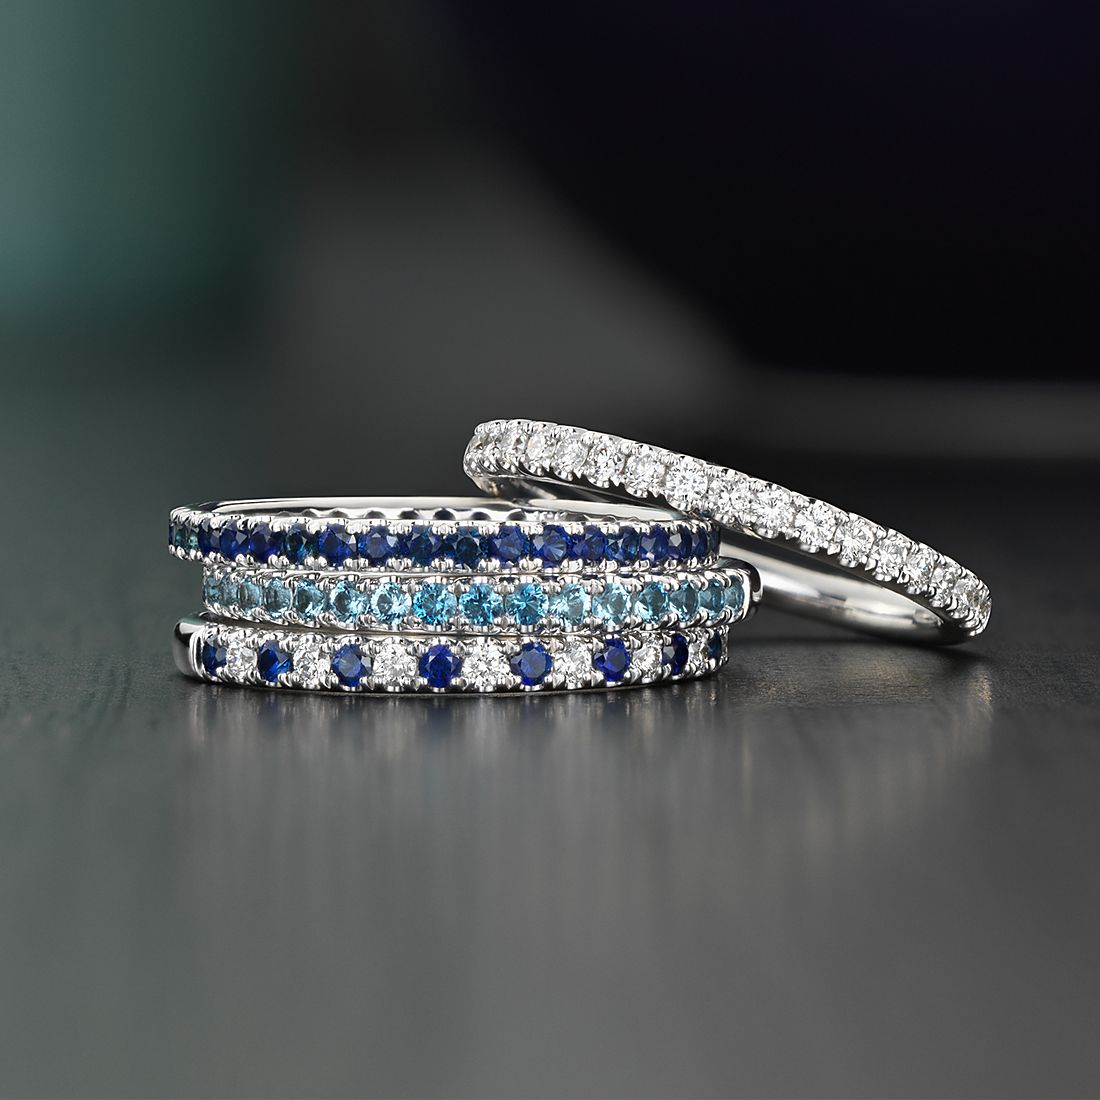 Stack of diamond and gemstone rings